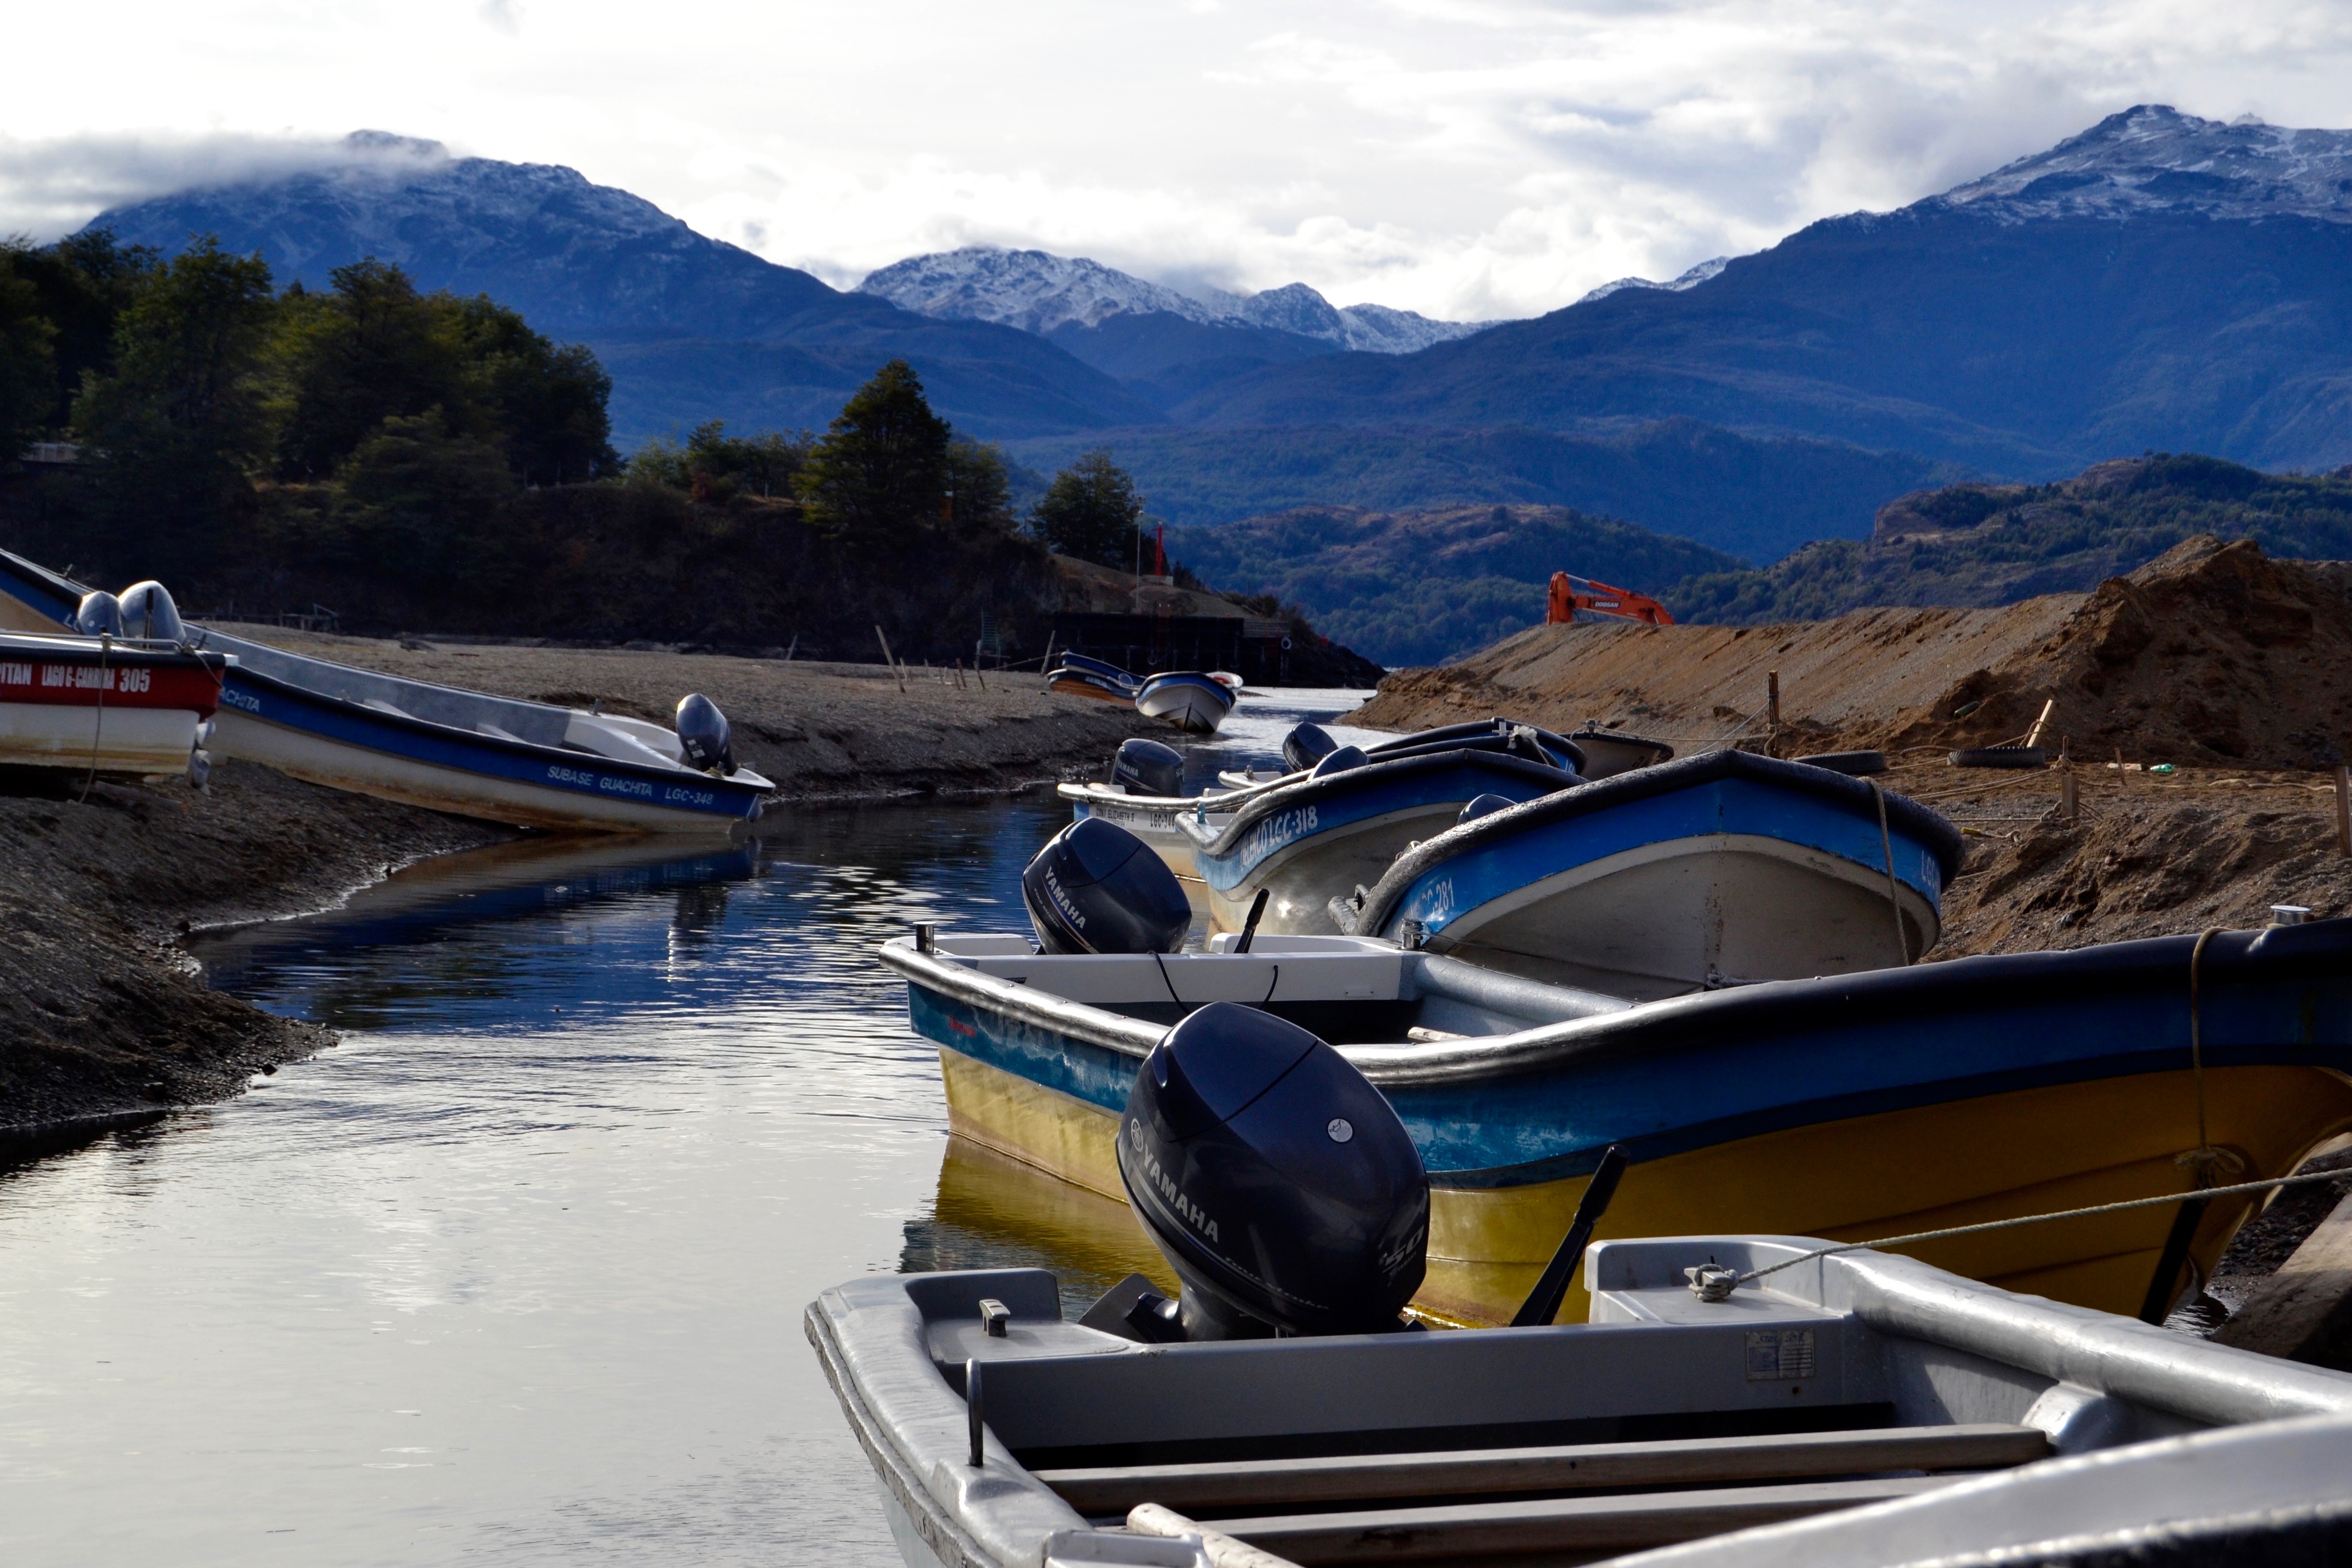 The small boats stand at Lake General Carrera's shore, where the main touristic atraction is Capillas de Mármol.